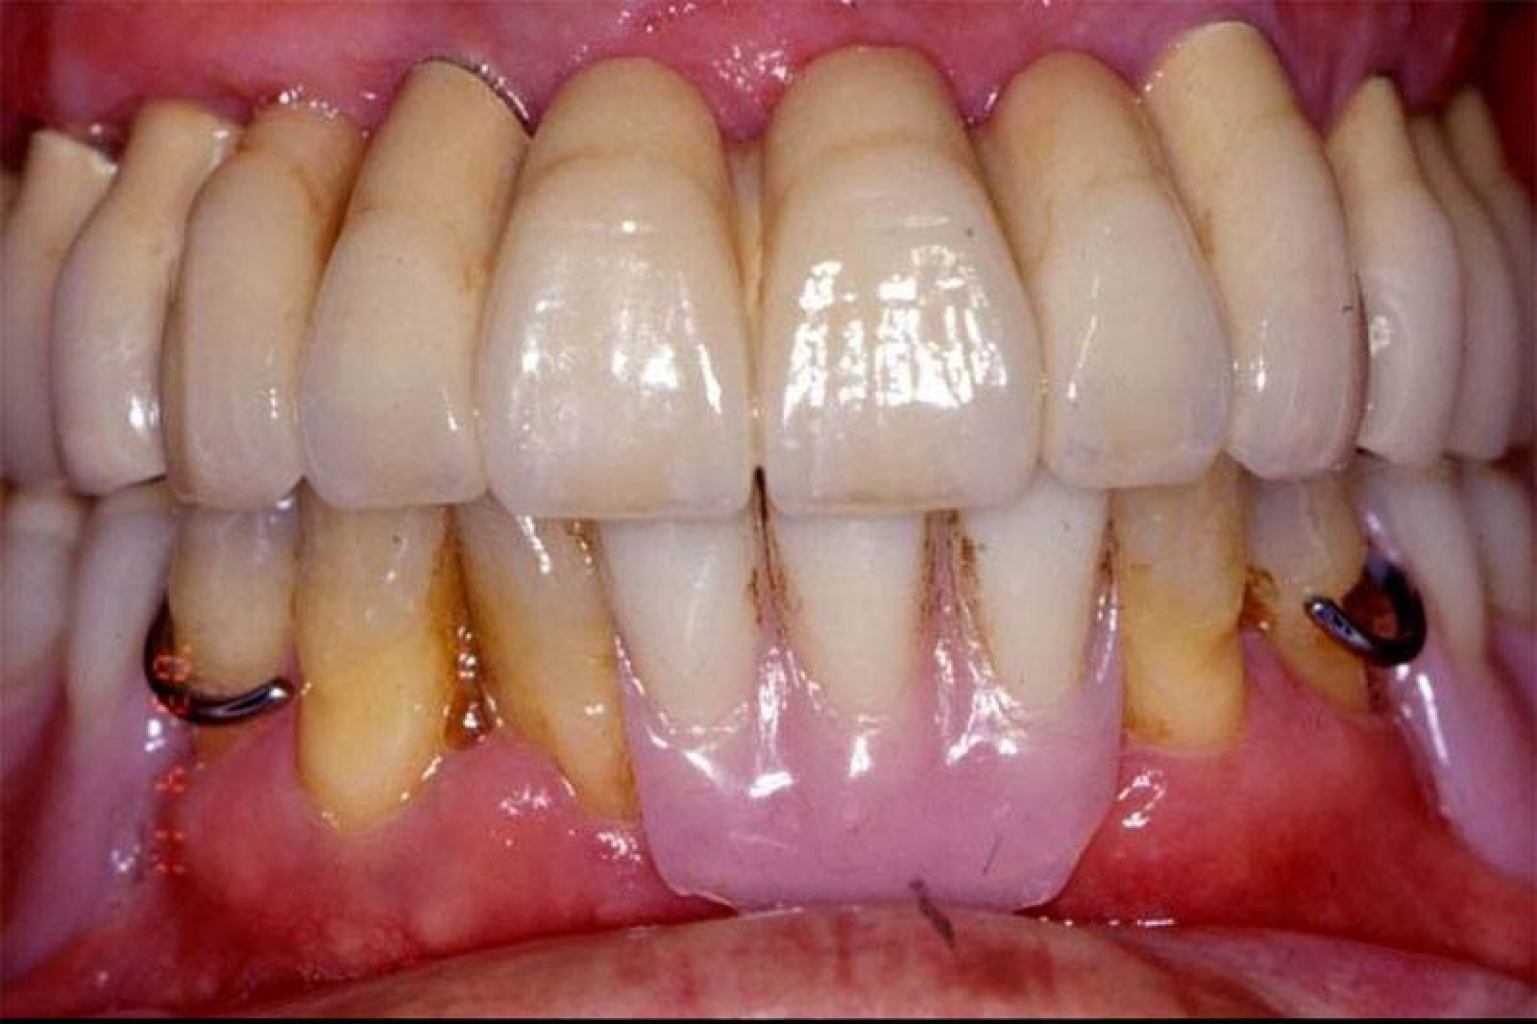 The patient’s smile was restored using three separate implant-supported bridges. He also required a partial bottom denture.